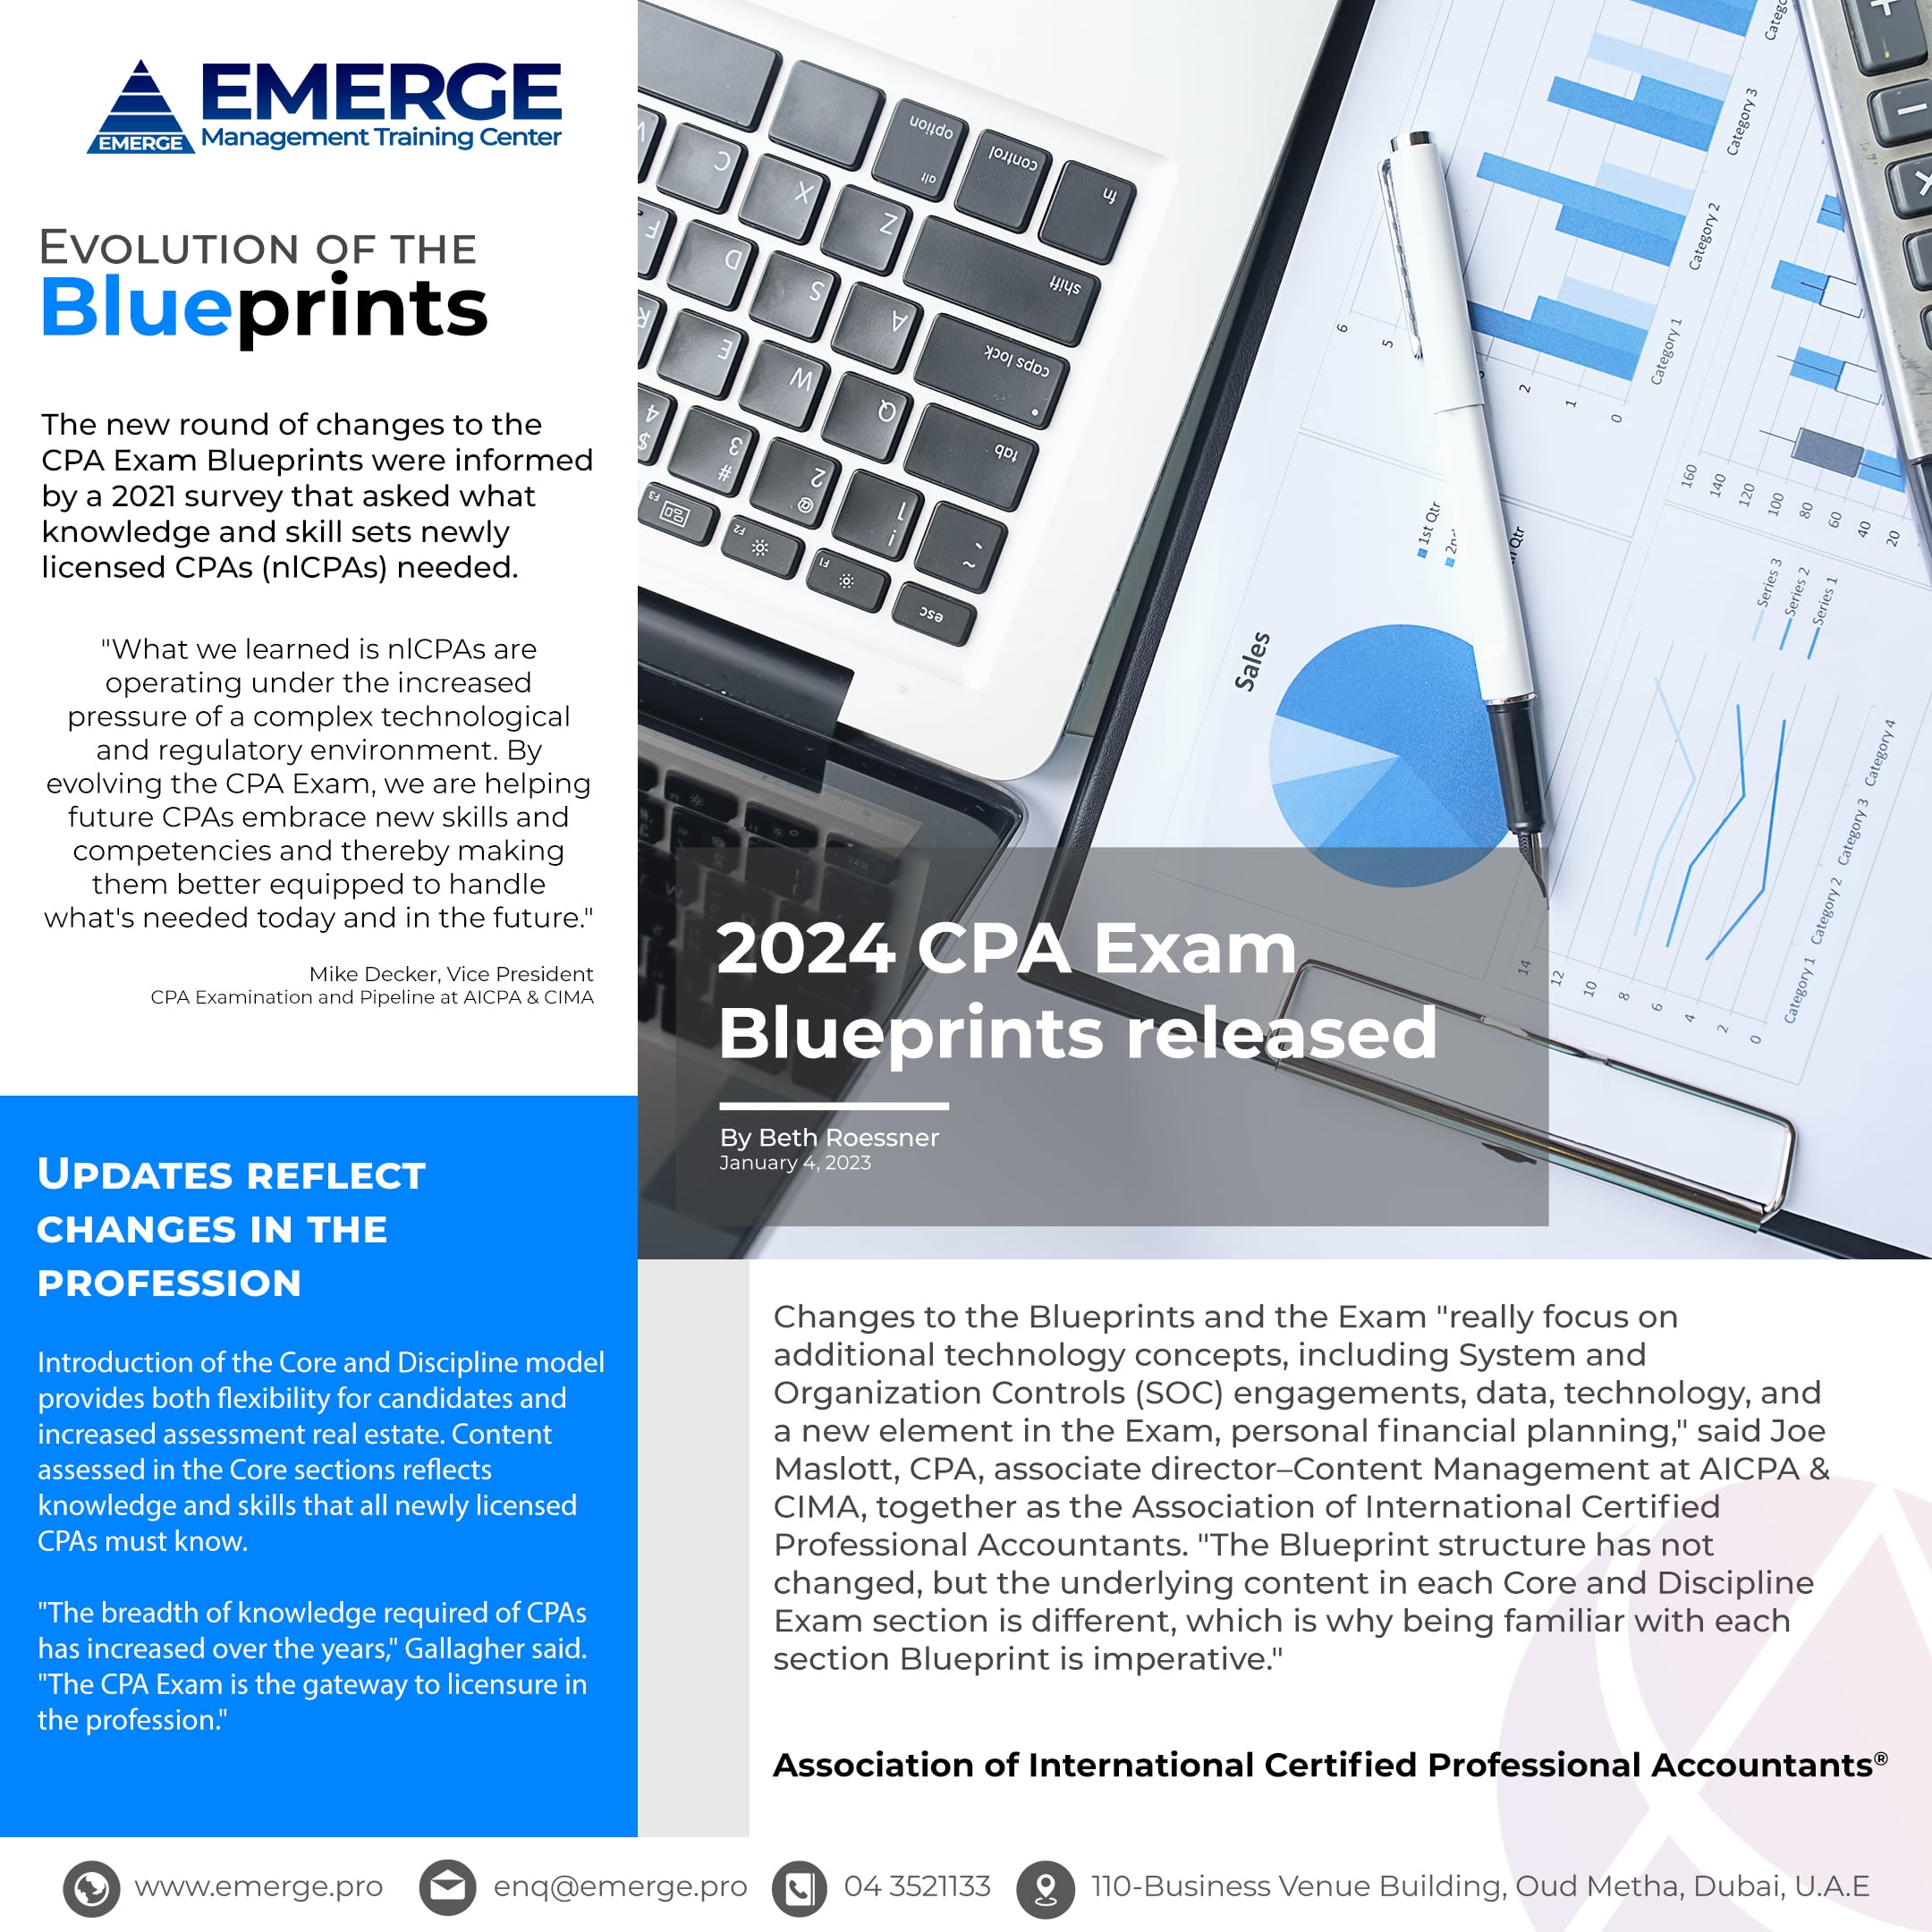 2024 CPA Exam Blueprints Released Min 